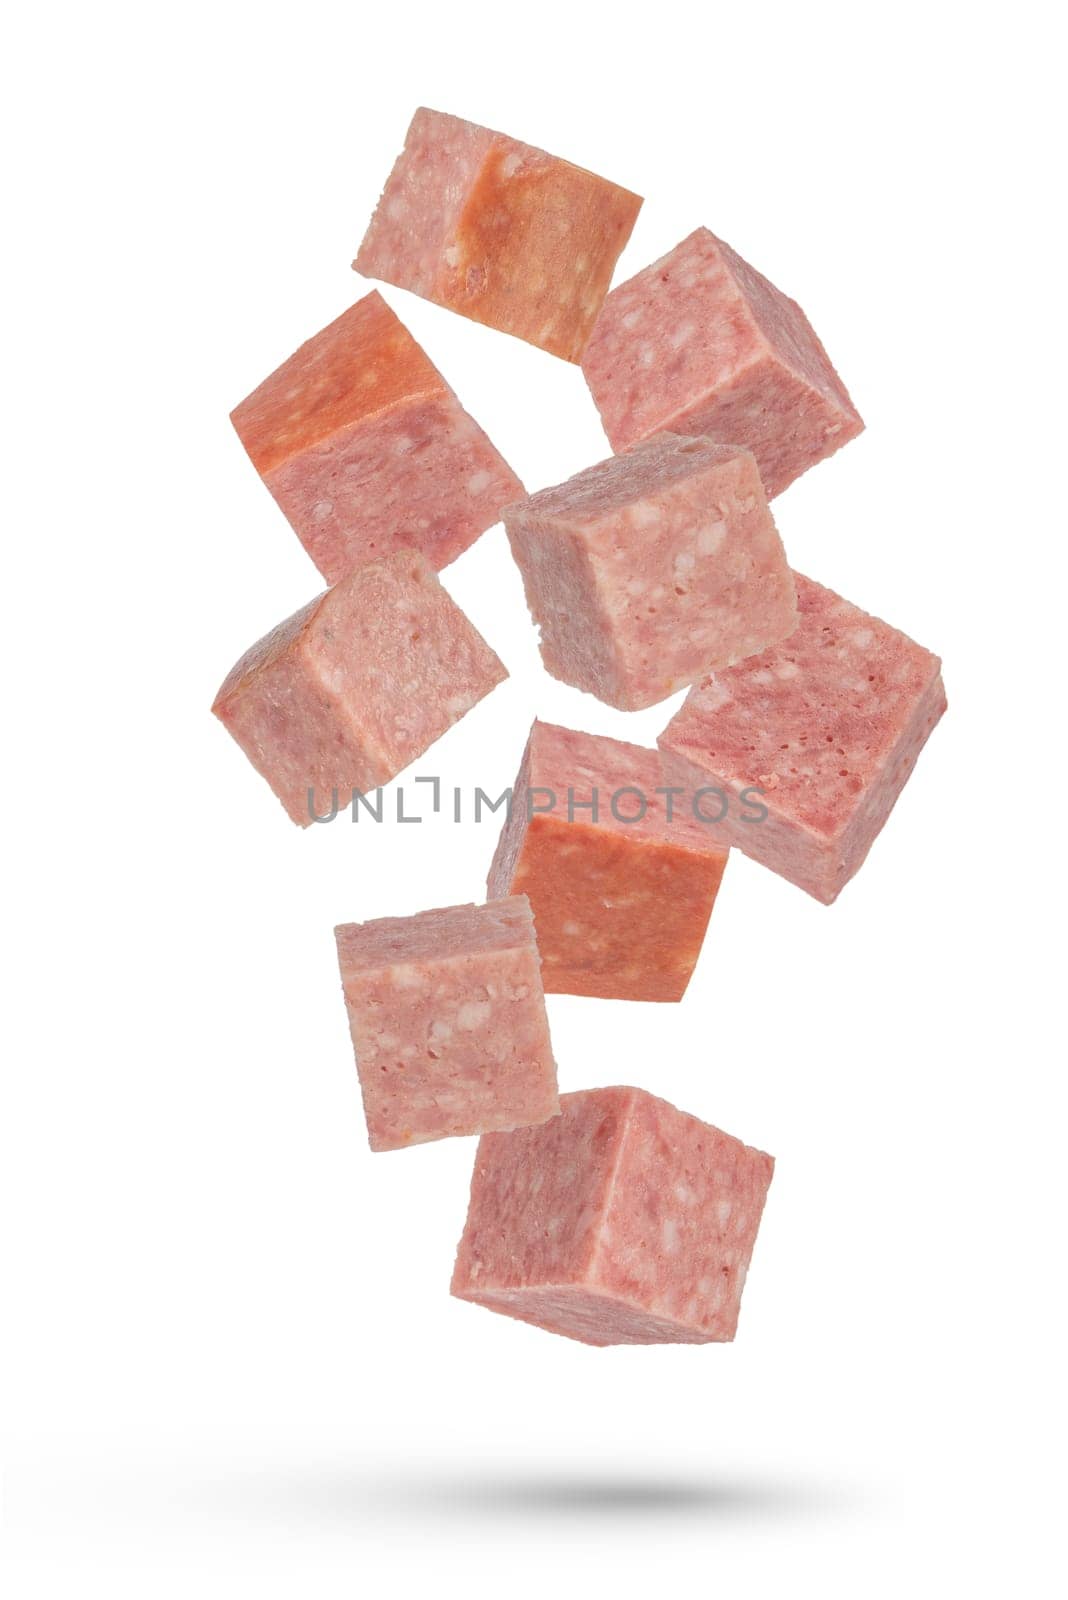 Flying sausage. Cubes of smoked sausage on a white isolated background. Salami cubes fall on a white background, for insertion into a design or project